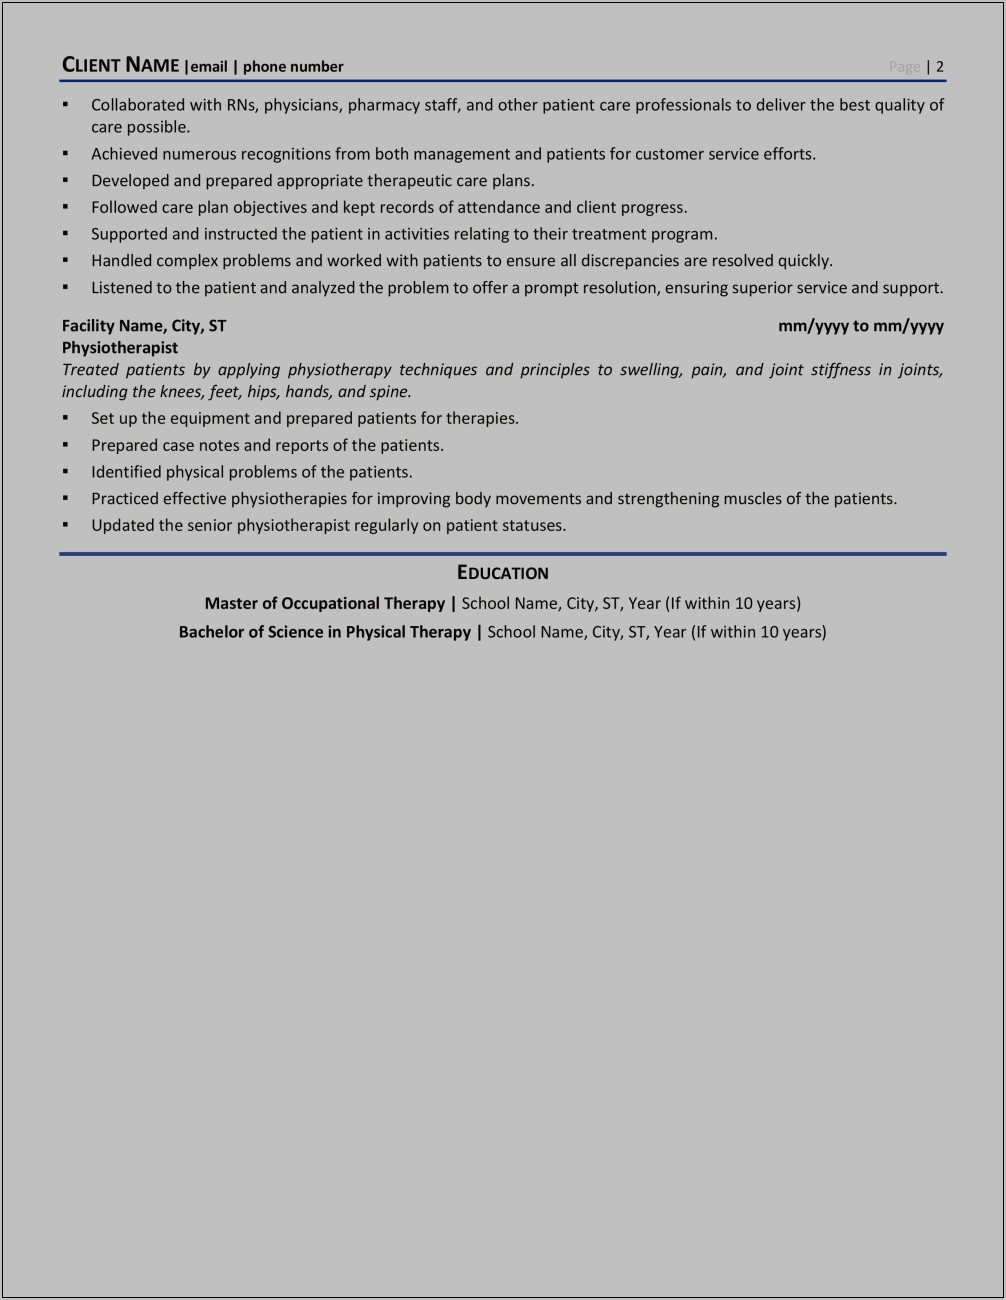 Resume Objective Examples For Occupational Therapist